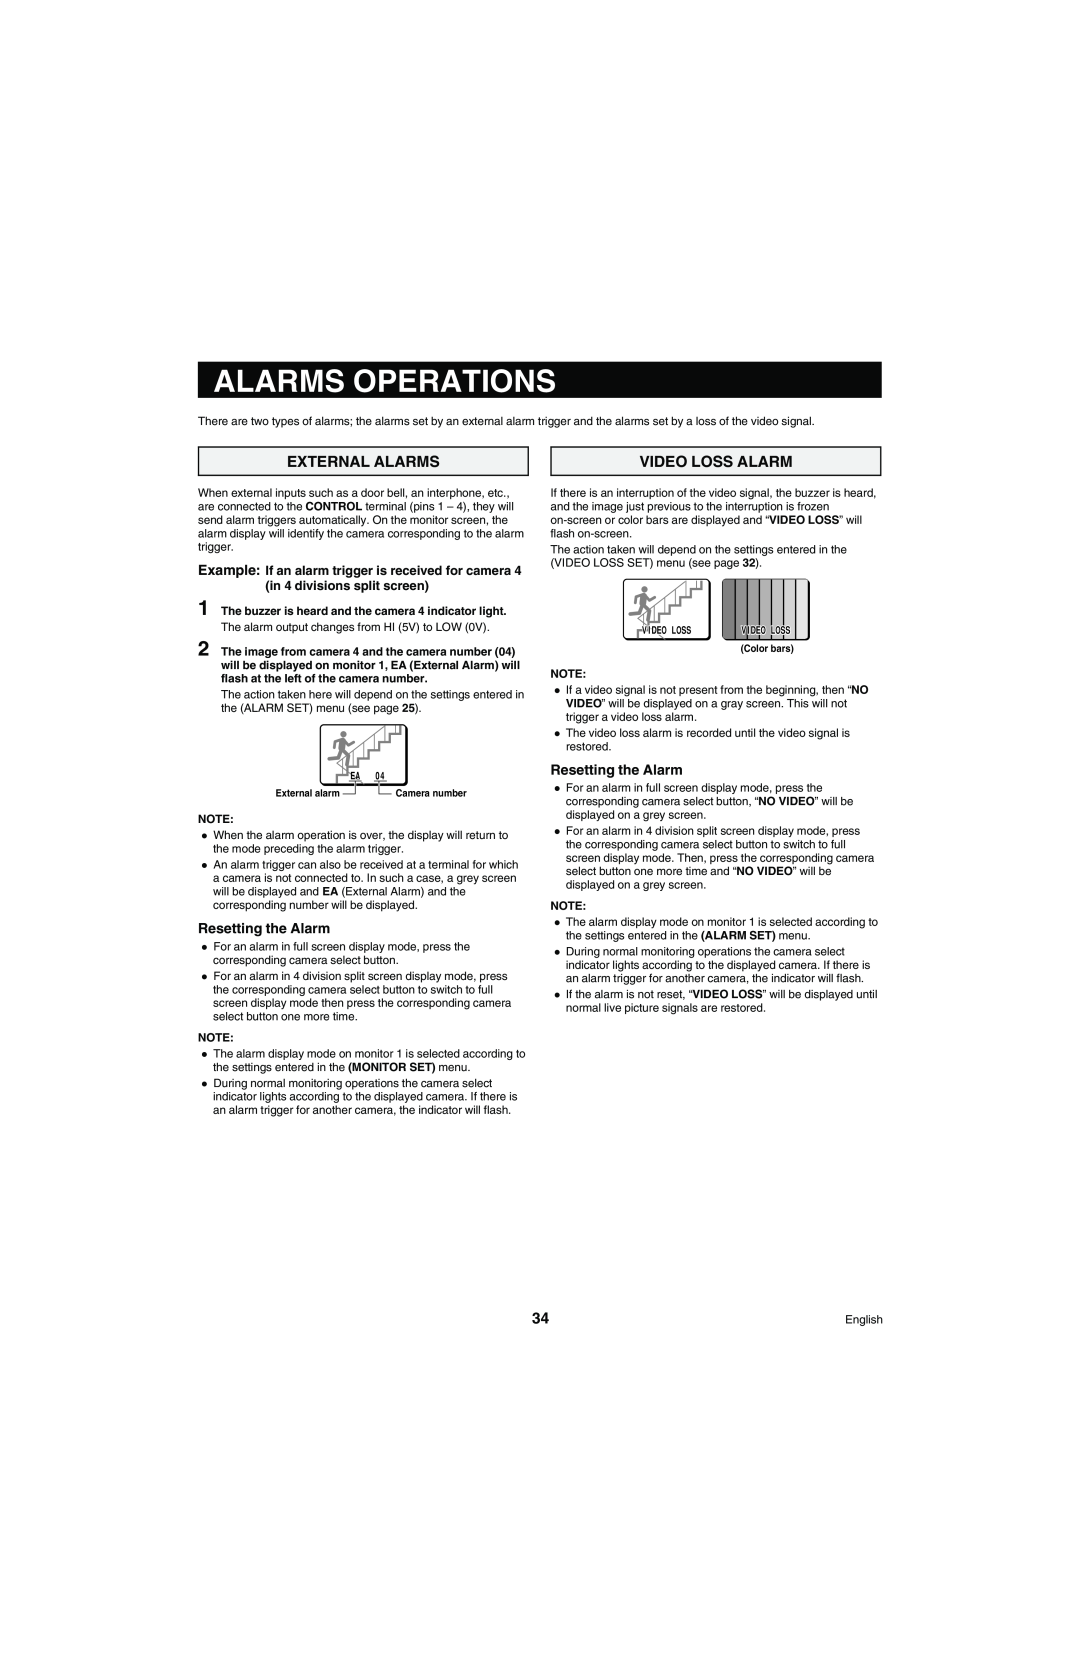 Sanyo MPX-MD4 instruction manual Alarms Operations, External Alarms, Video Loss Alarm, Resetting the Alarm 